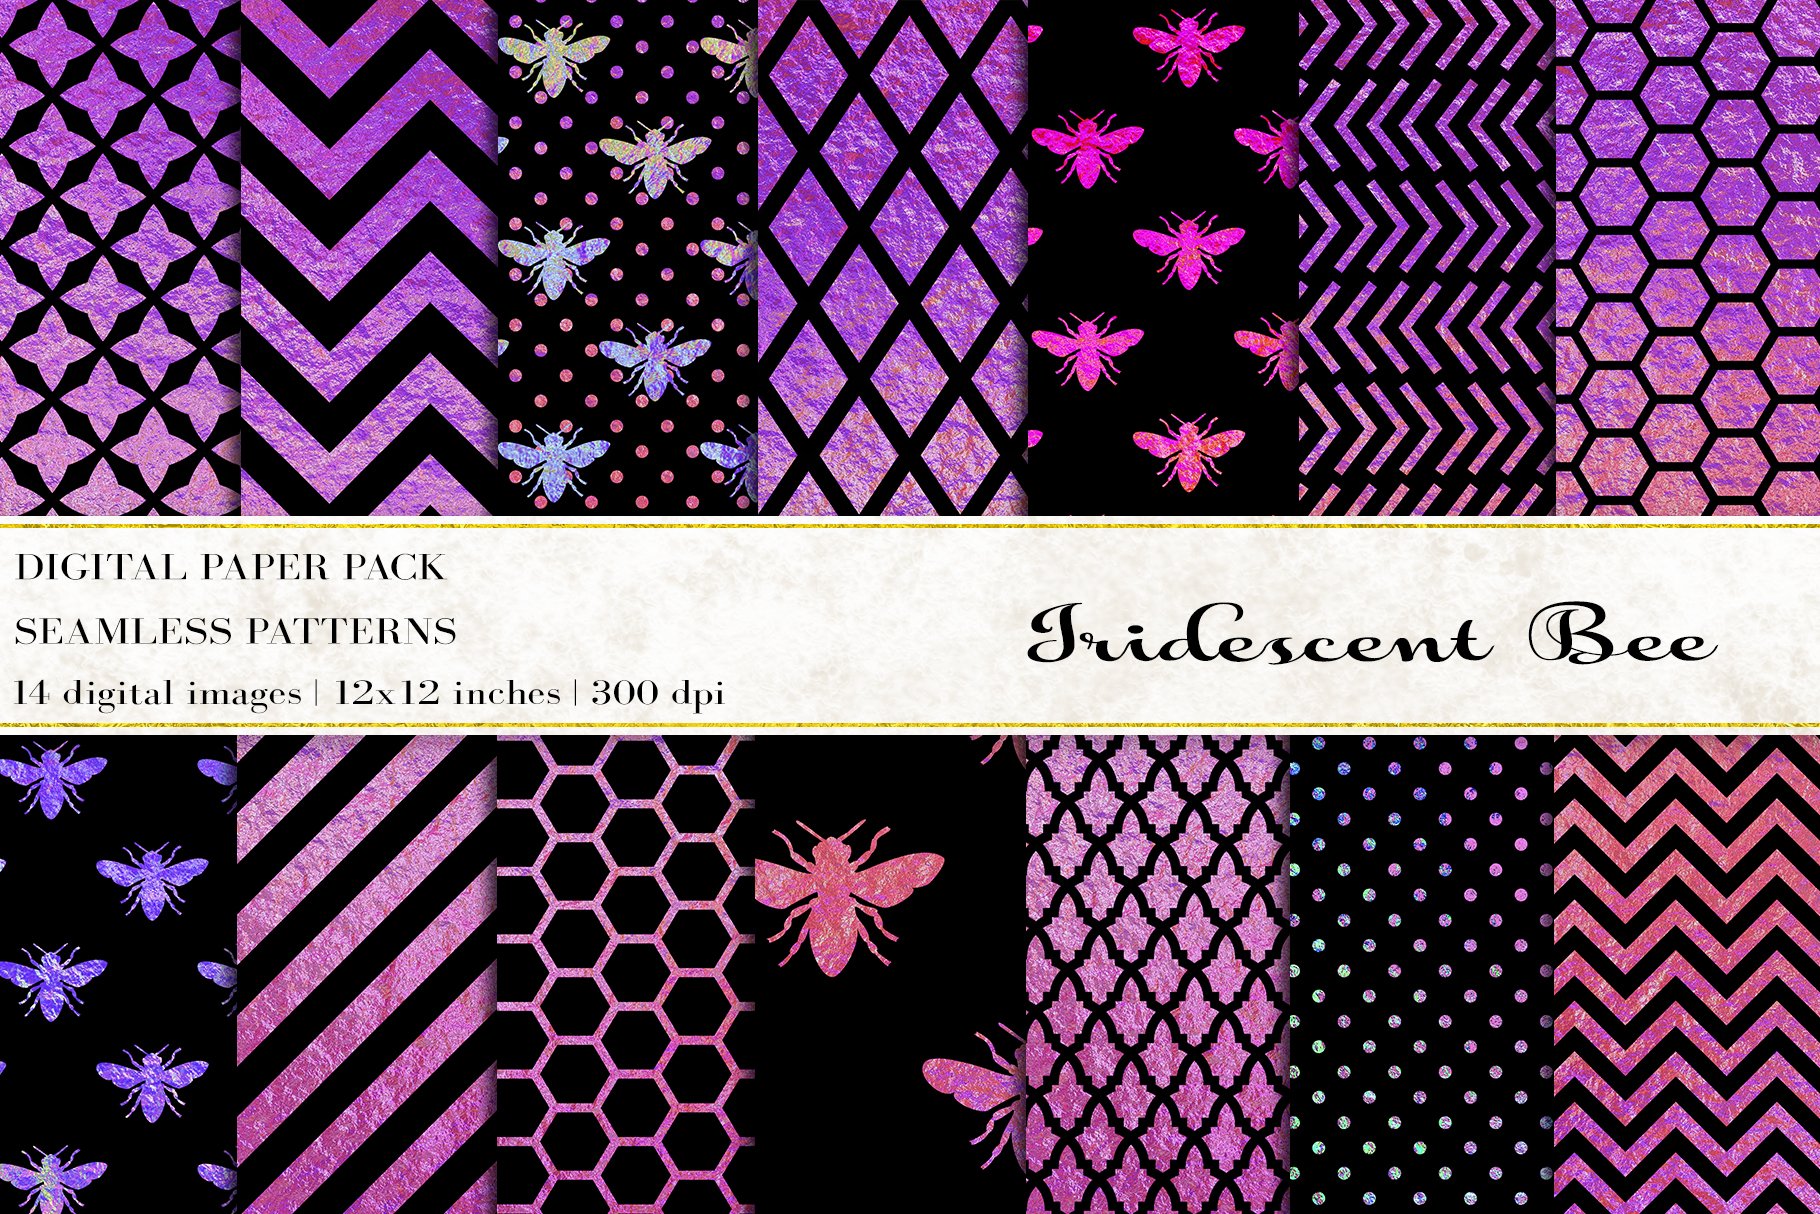 Iridescent Bee Digital Papers cover image.